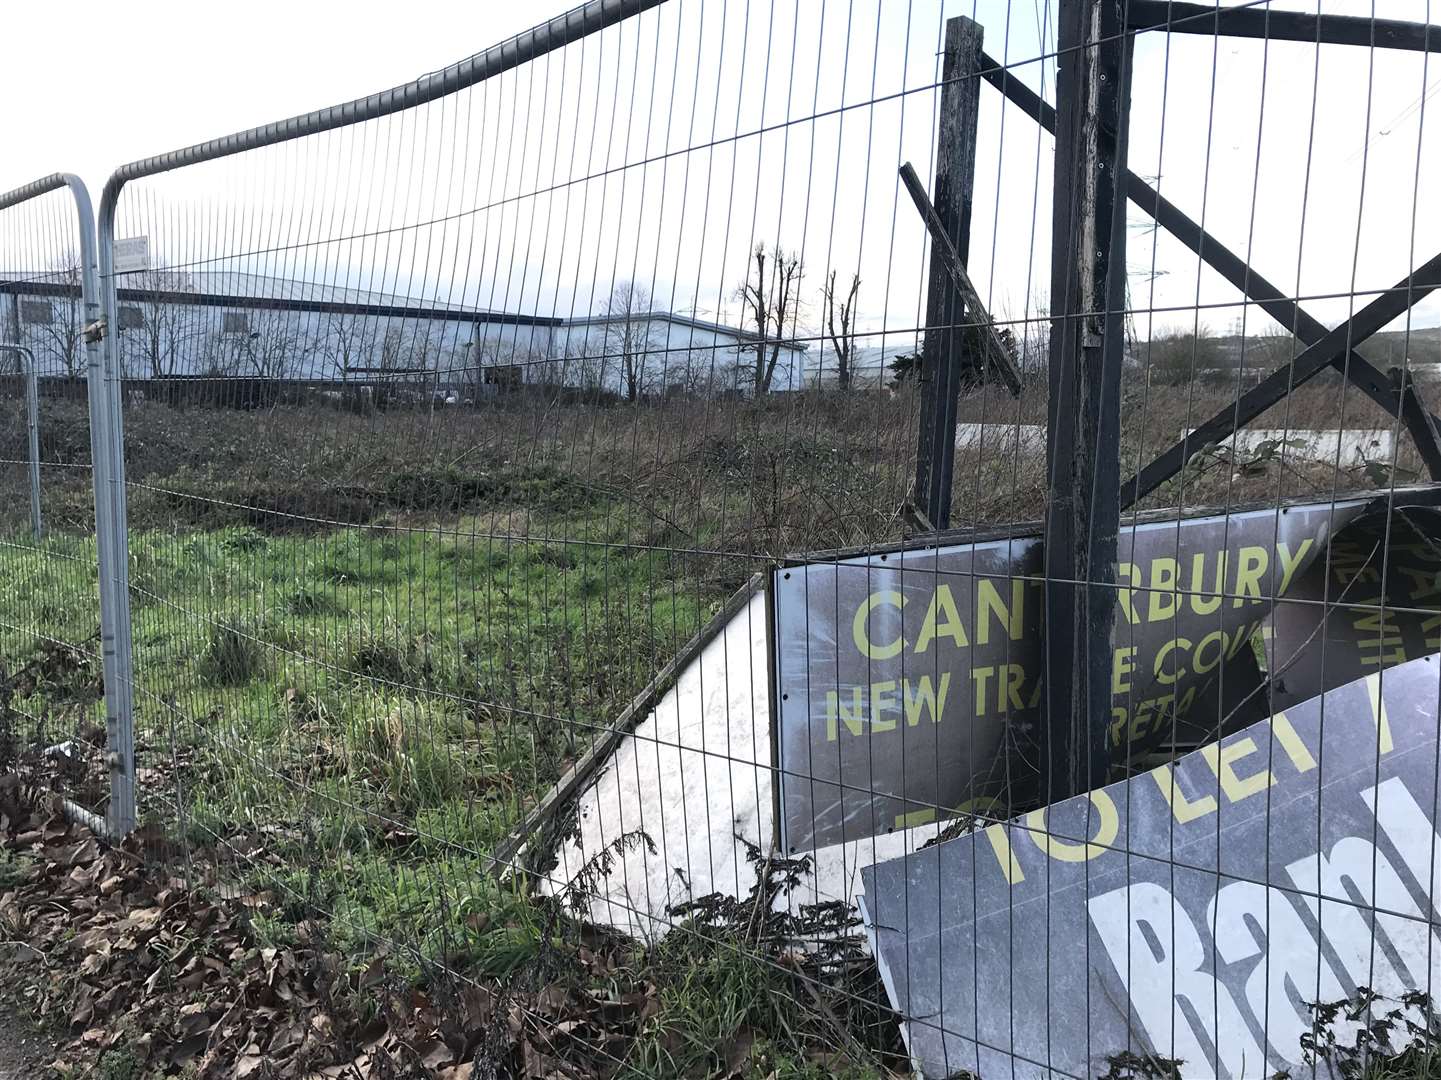 The site, which used to be part of the Southern Water sewage works, has long been a blot on Canterbury's landscape